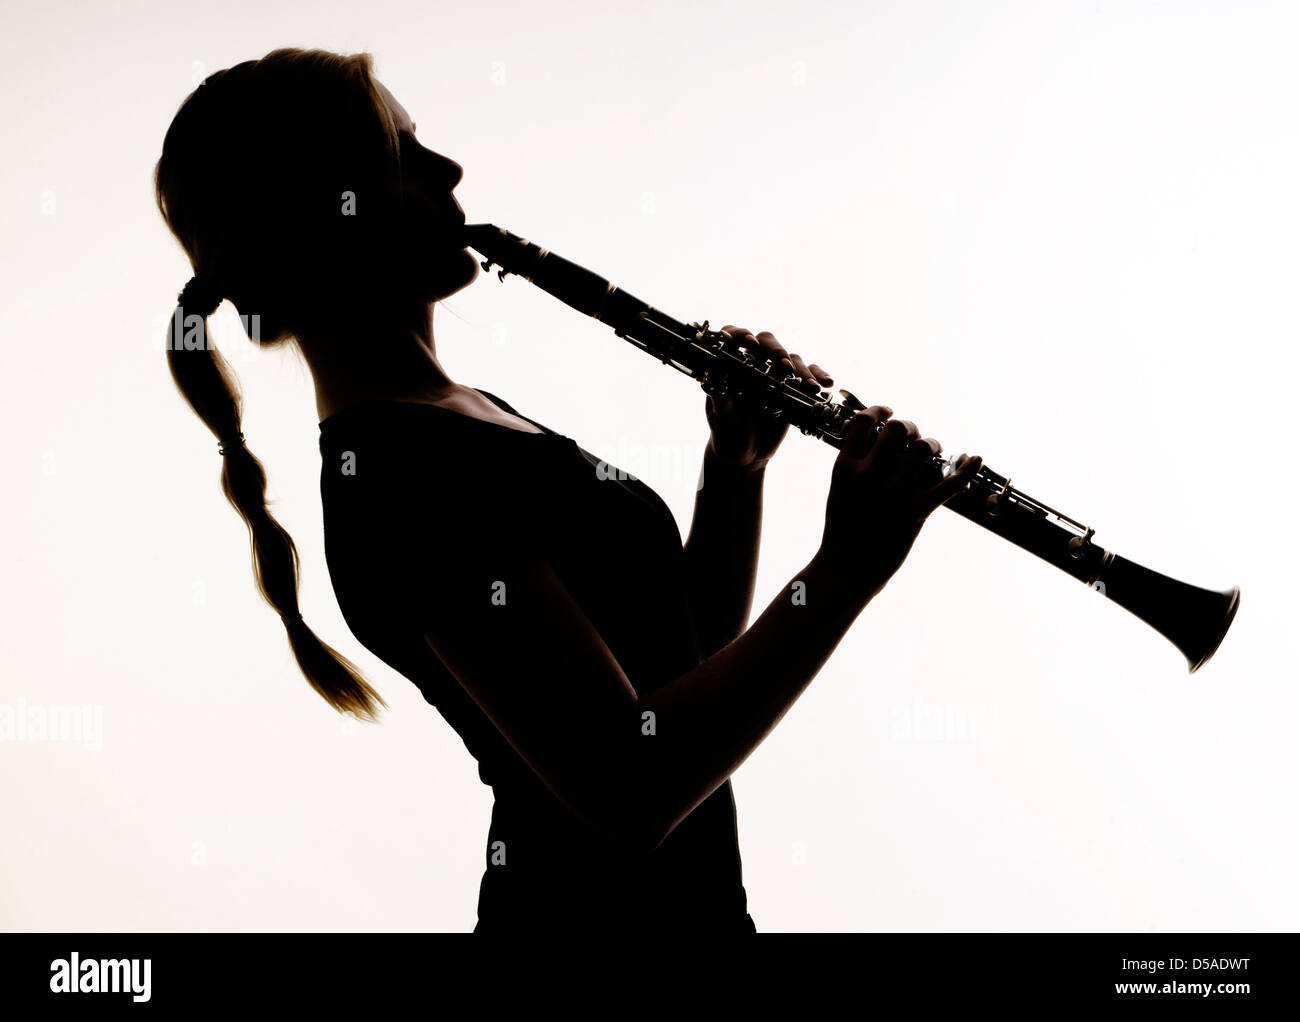 Female Musician Practices her Woodwind Technique on a Clarinet Photographed in silhouette Stock Photo